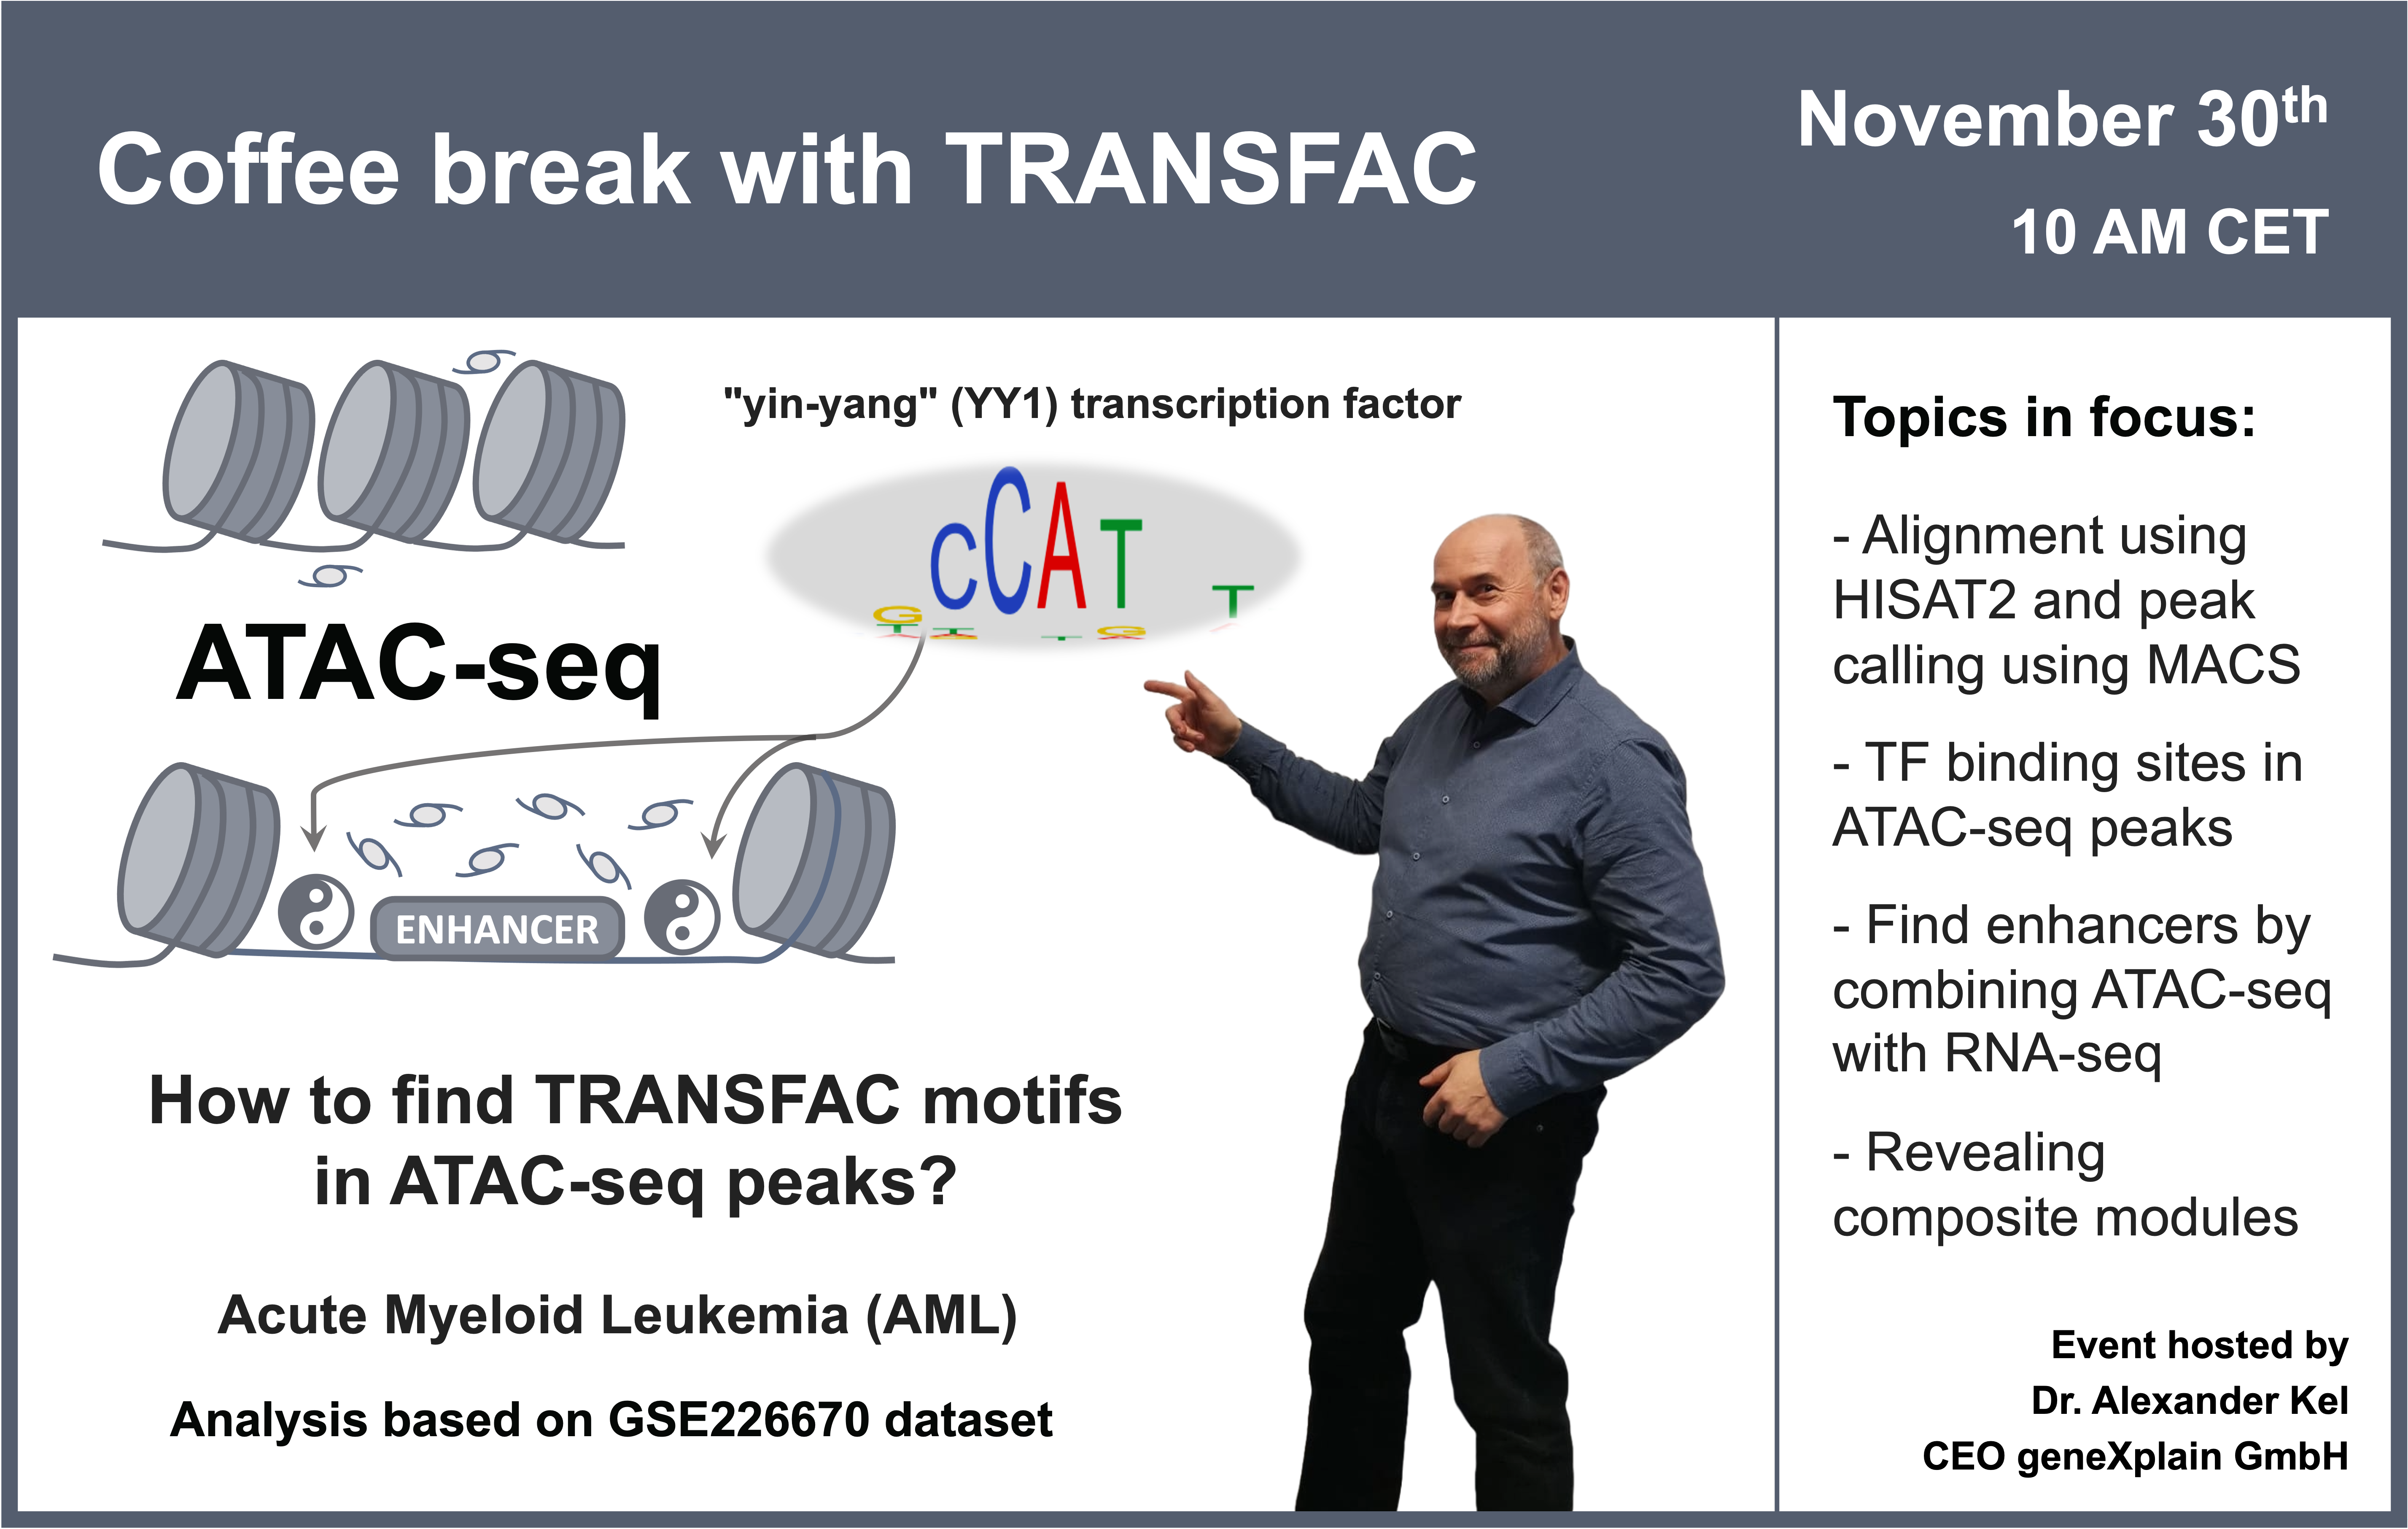 Coffee break with TRANSFAC on Novermber 30th at 10 AM CET